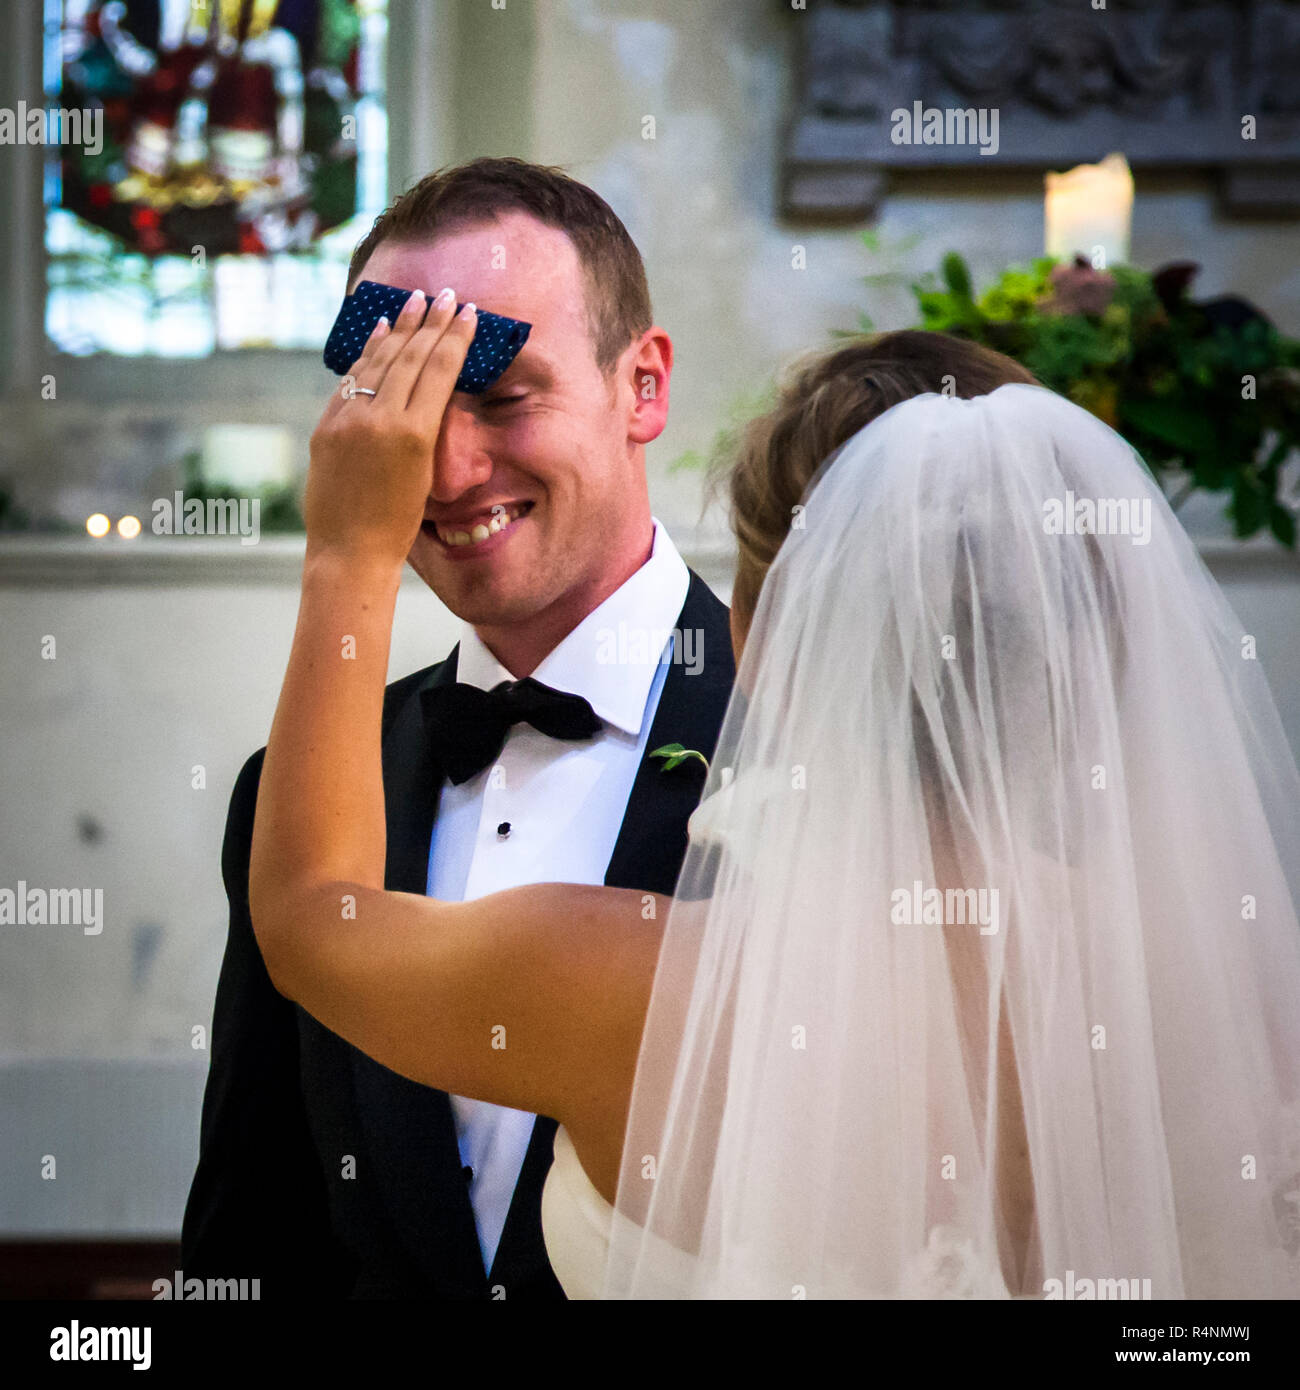 During Wedding in church, the bride dries the grooms forehead with a tissue Stock Photo